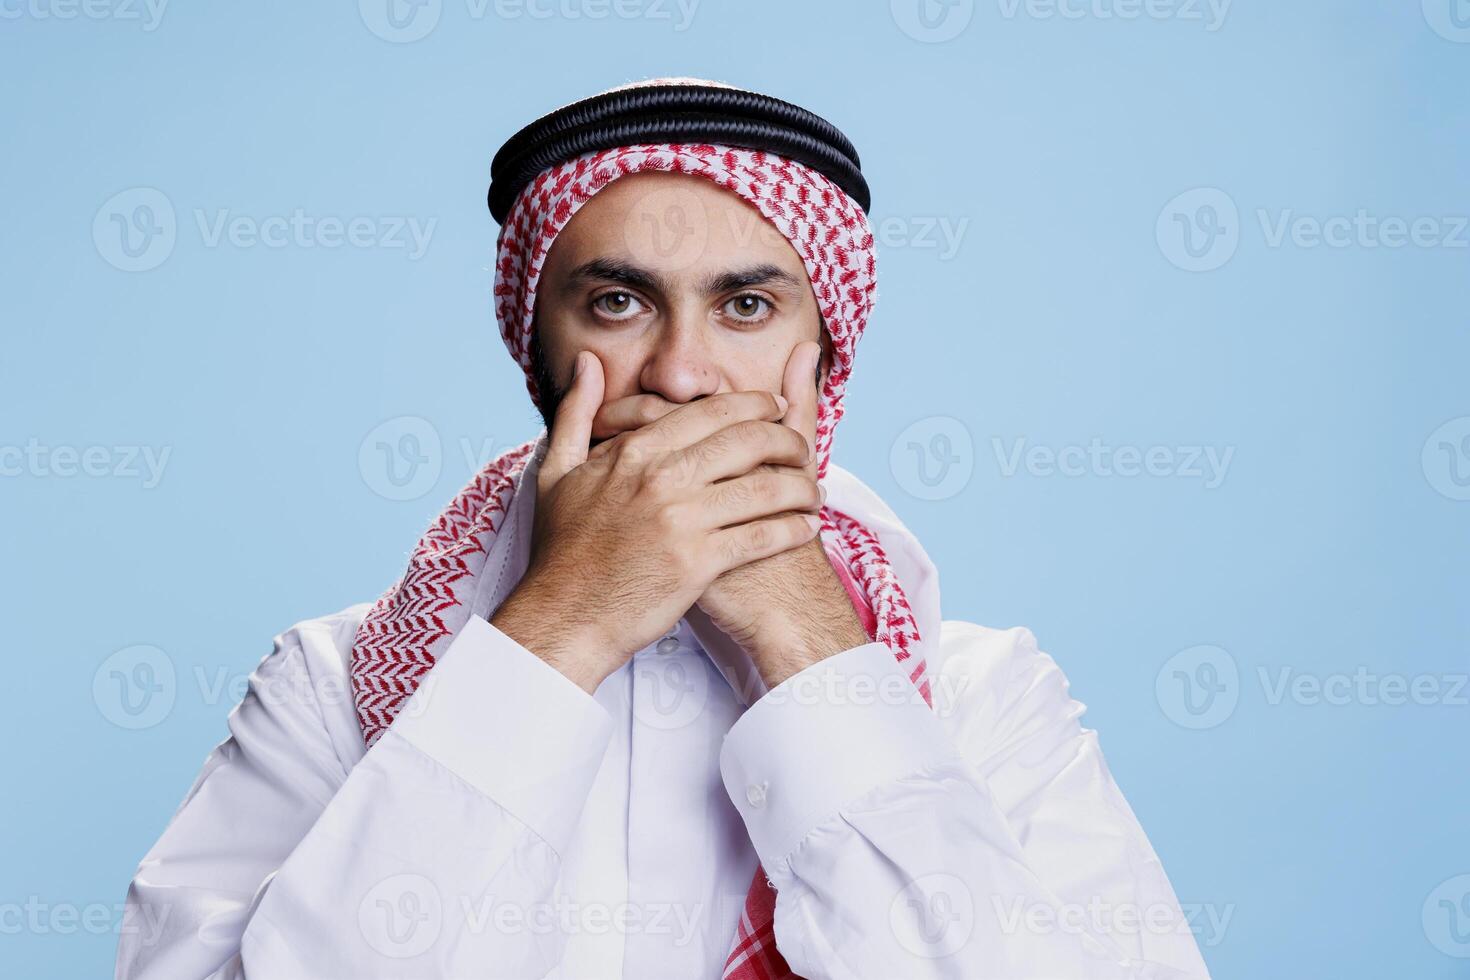 Man wearing traditional islamic clothes covering mouth with hands, showing speak no evil sign studio portrait. Muslim person keeping secret, showcasing three wise monkeys concept photo